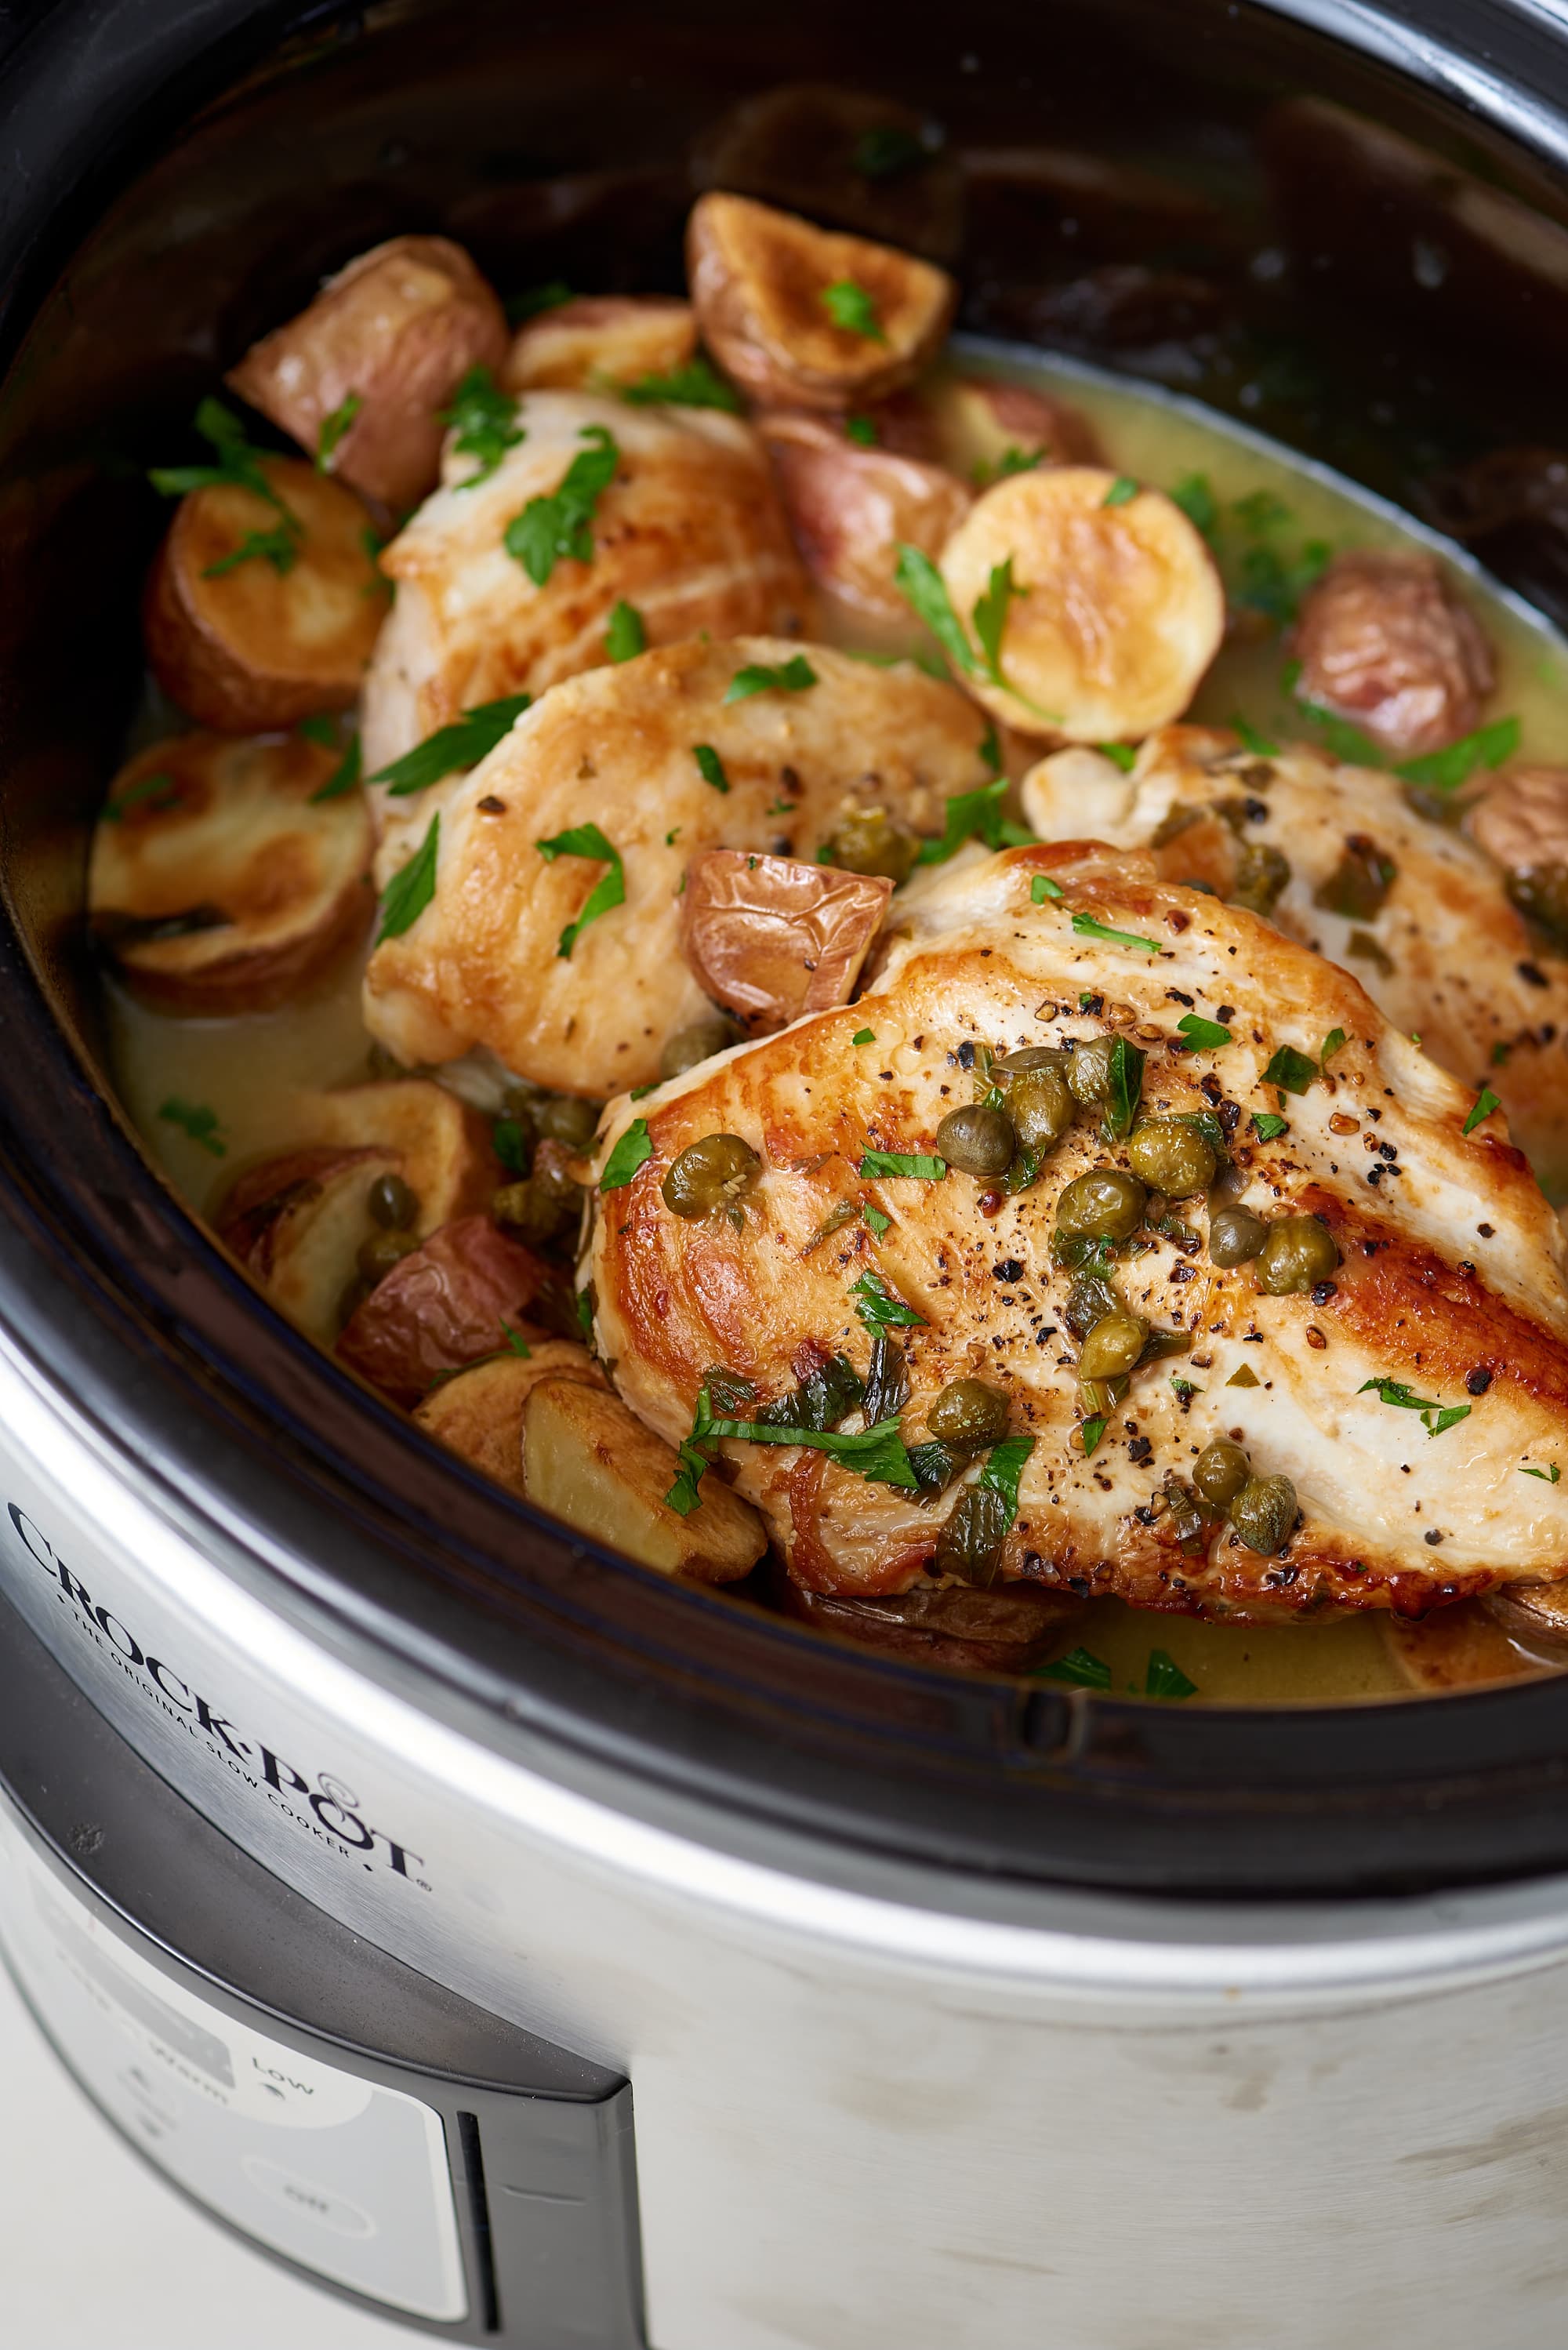 Why You Should Always Preheat Your Slow Cooker